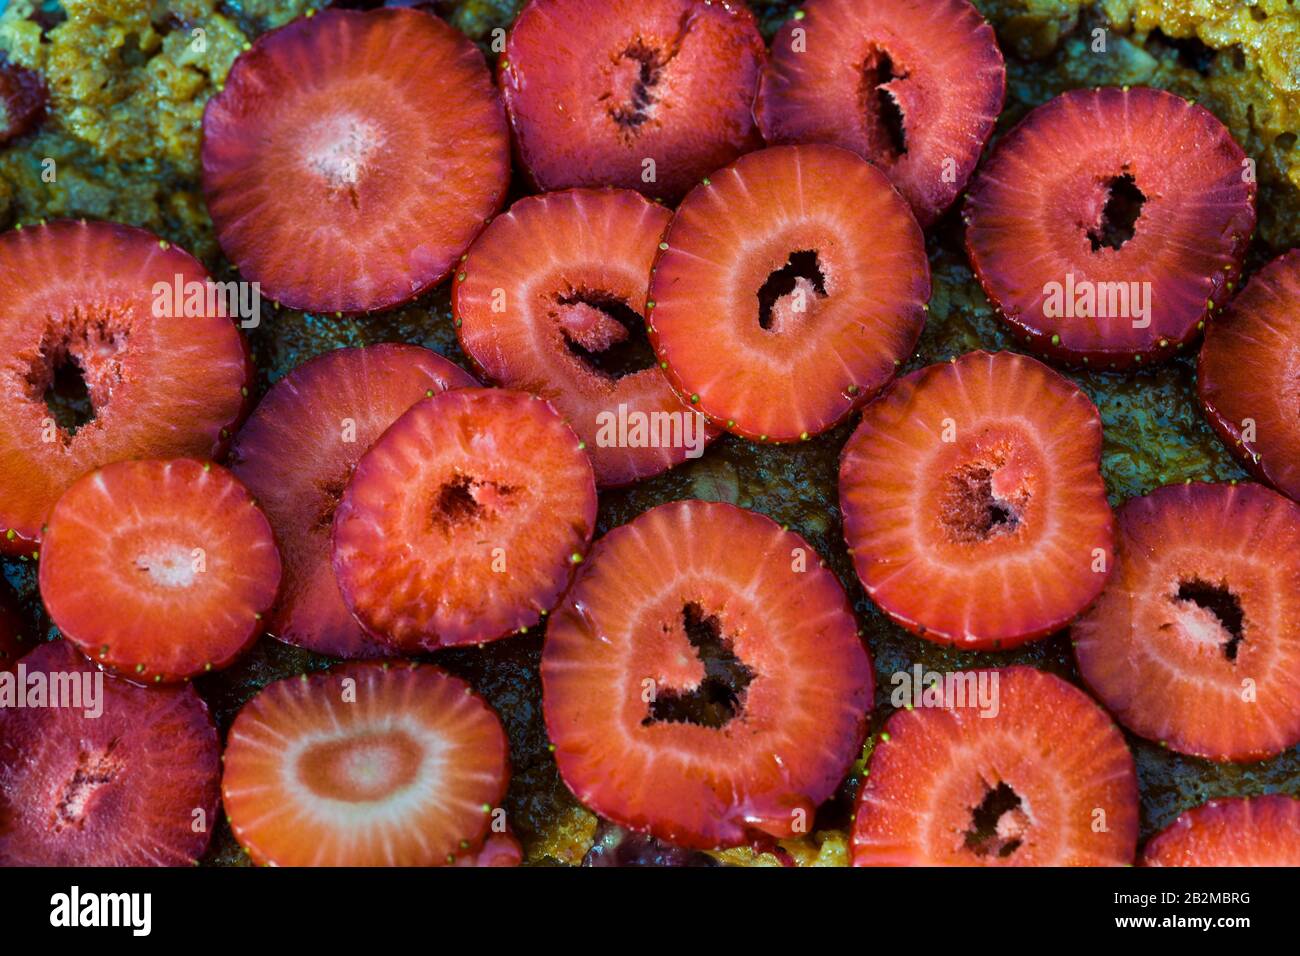 Sliced strawberries on a crumble cake Stock Photo